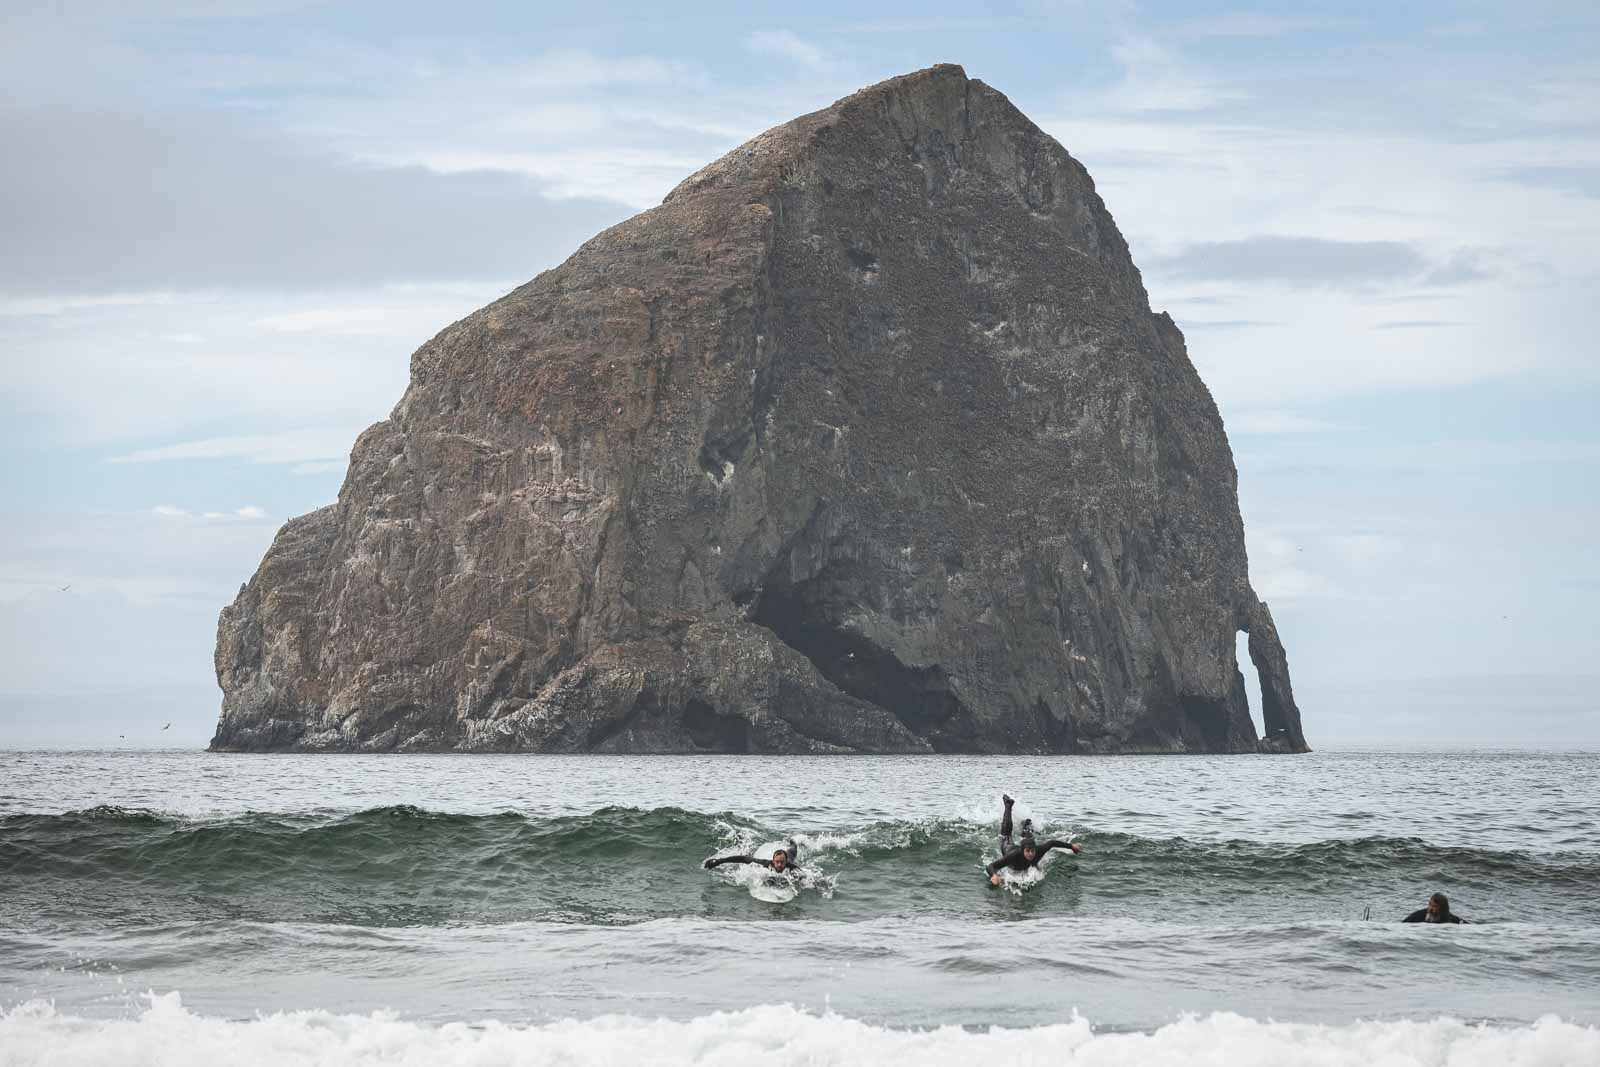 Two surfers surfing wave in ocean in front of large rock island in Pacific City.